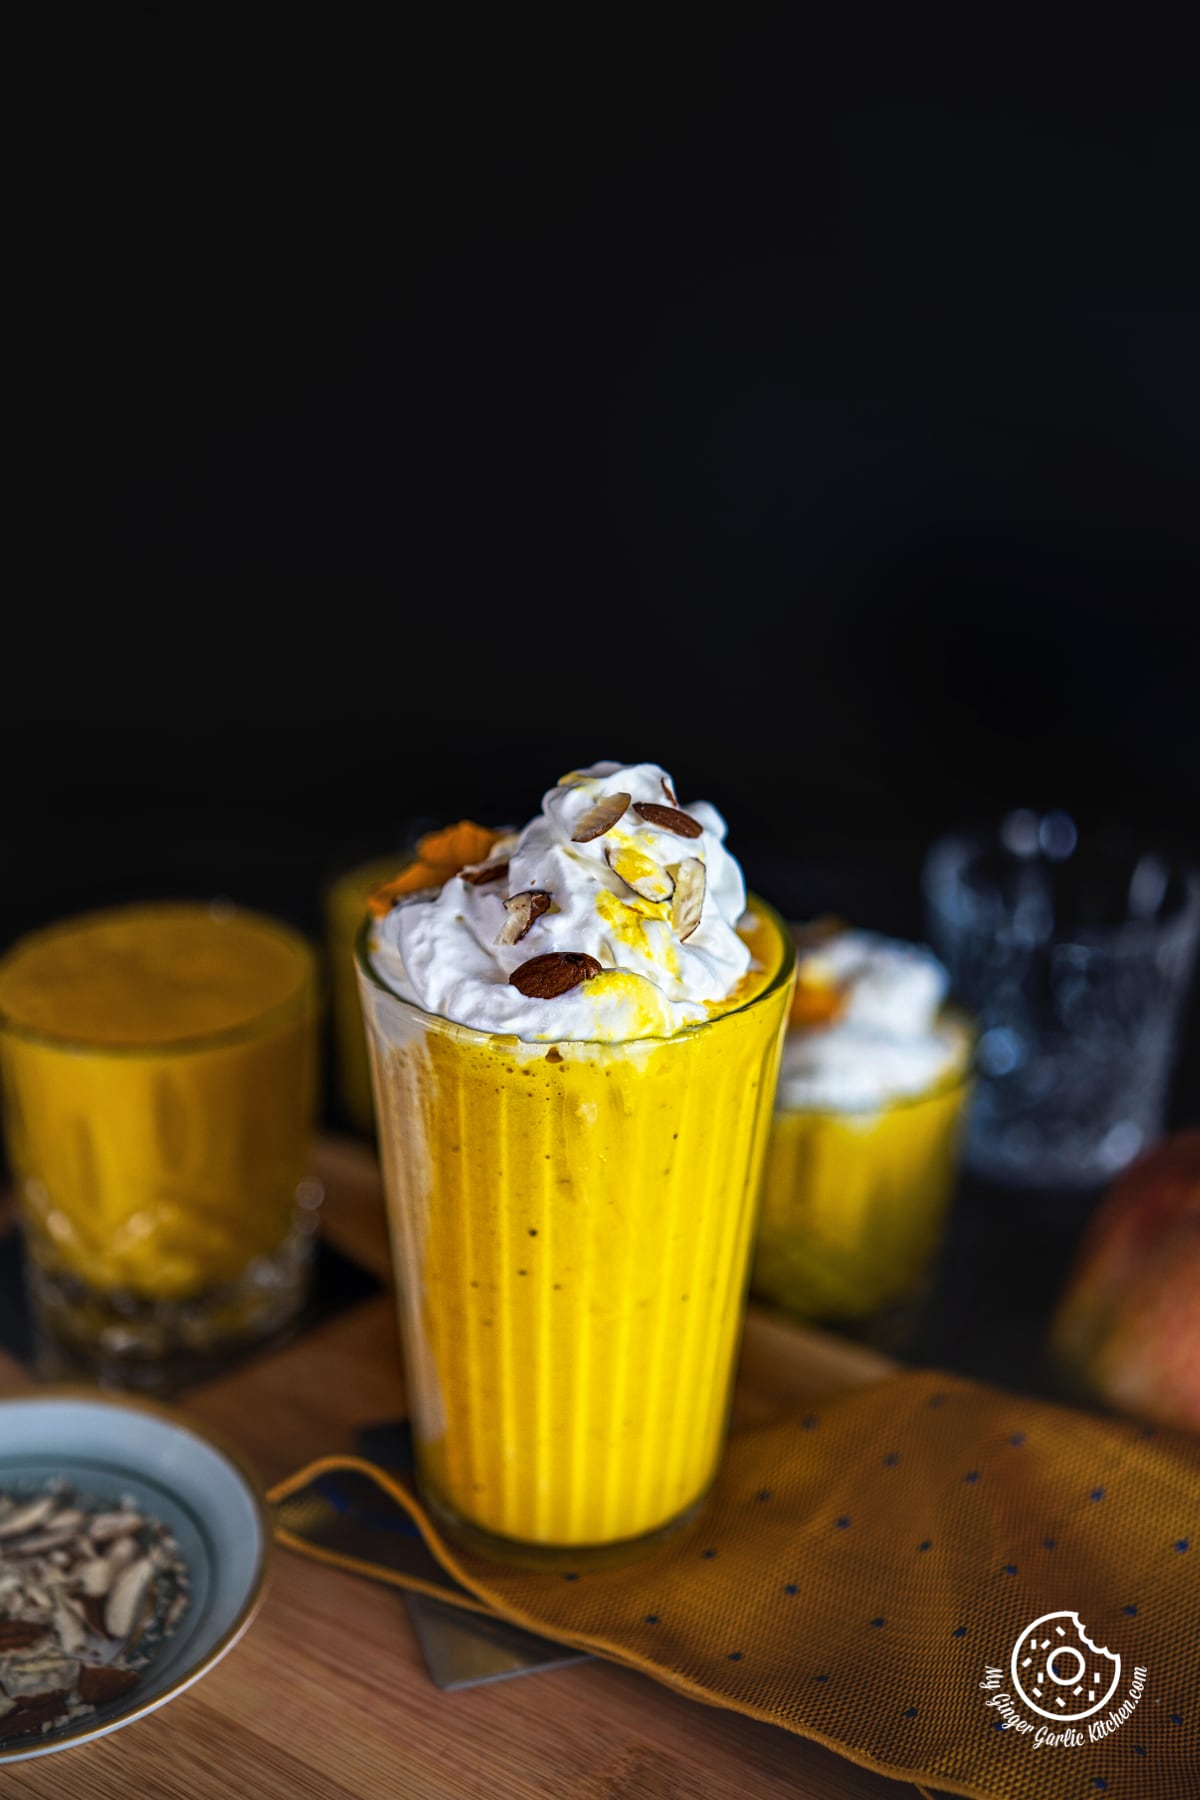 mango milkshake topped with whipped cream and nuts